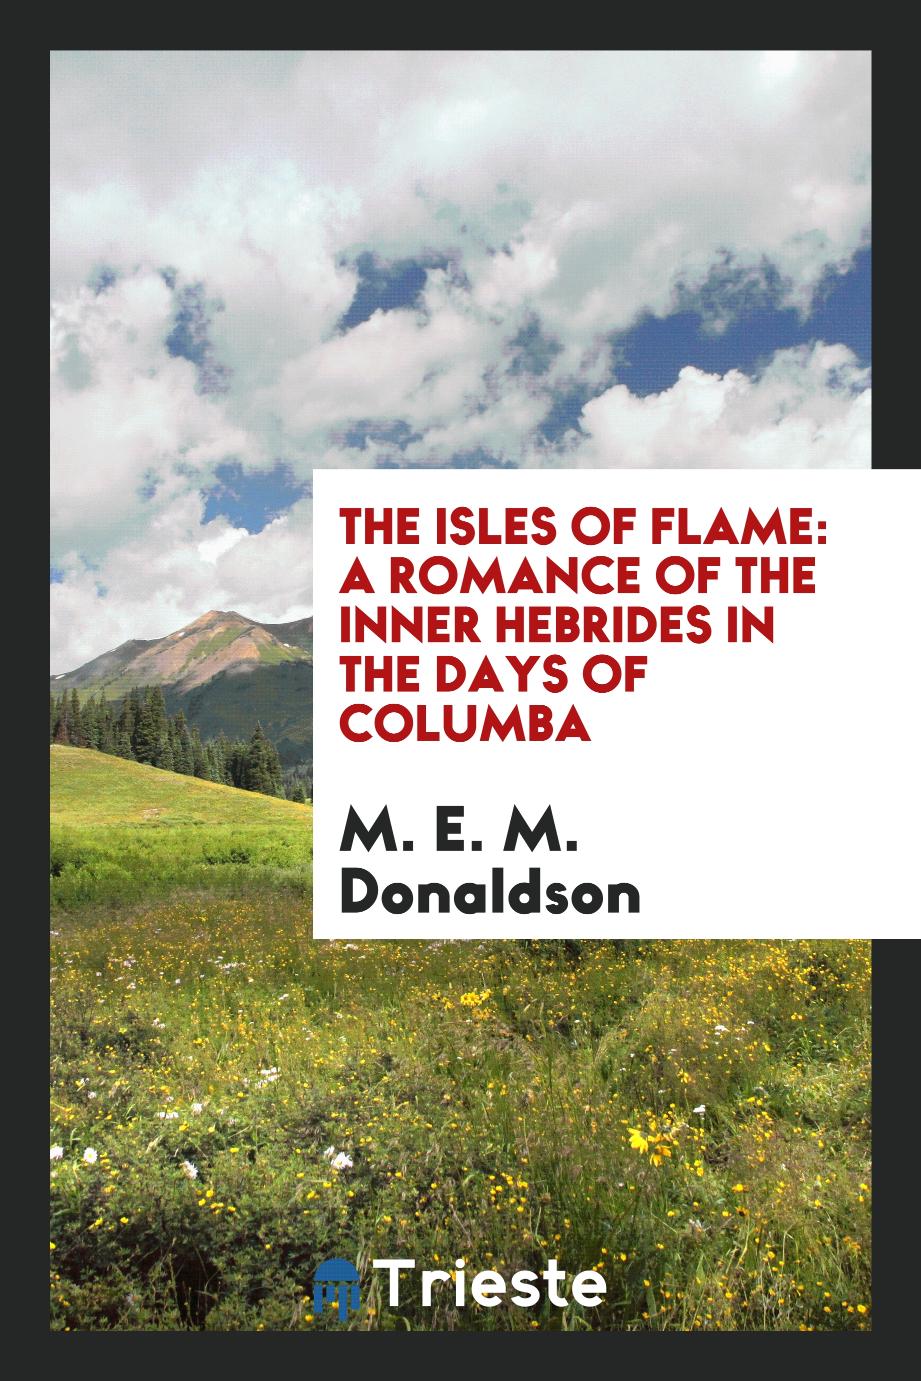 The isles of flame: a romance of the Inner Hebrides in the days of Columba